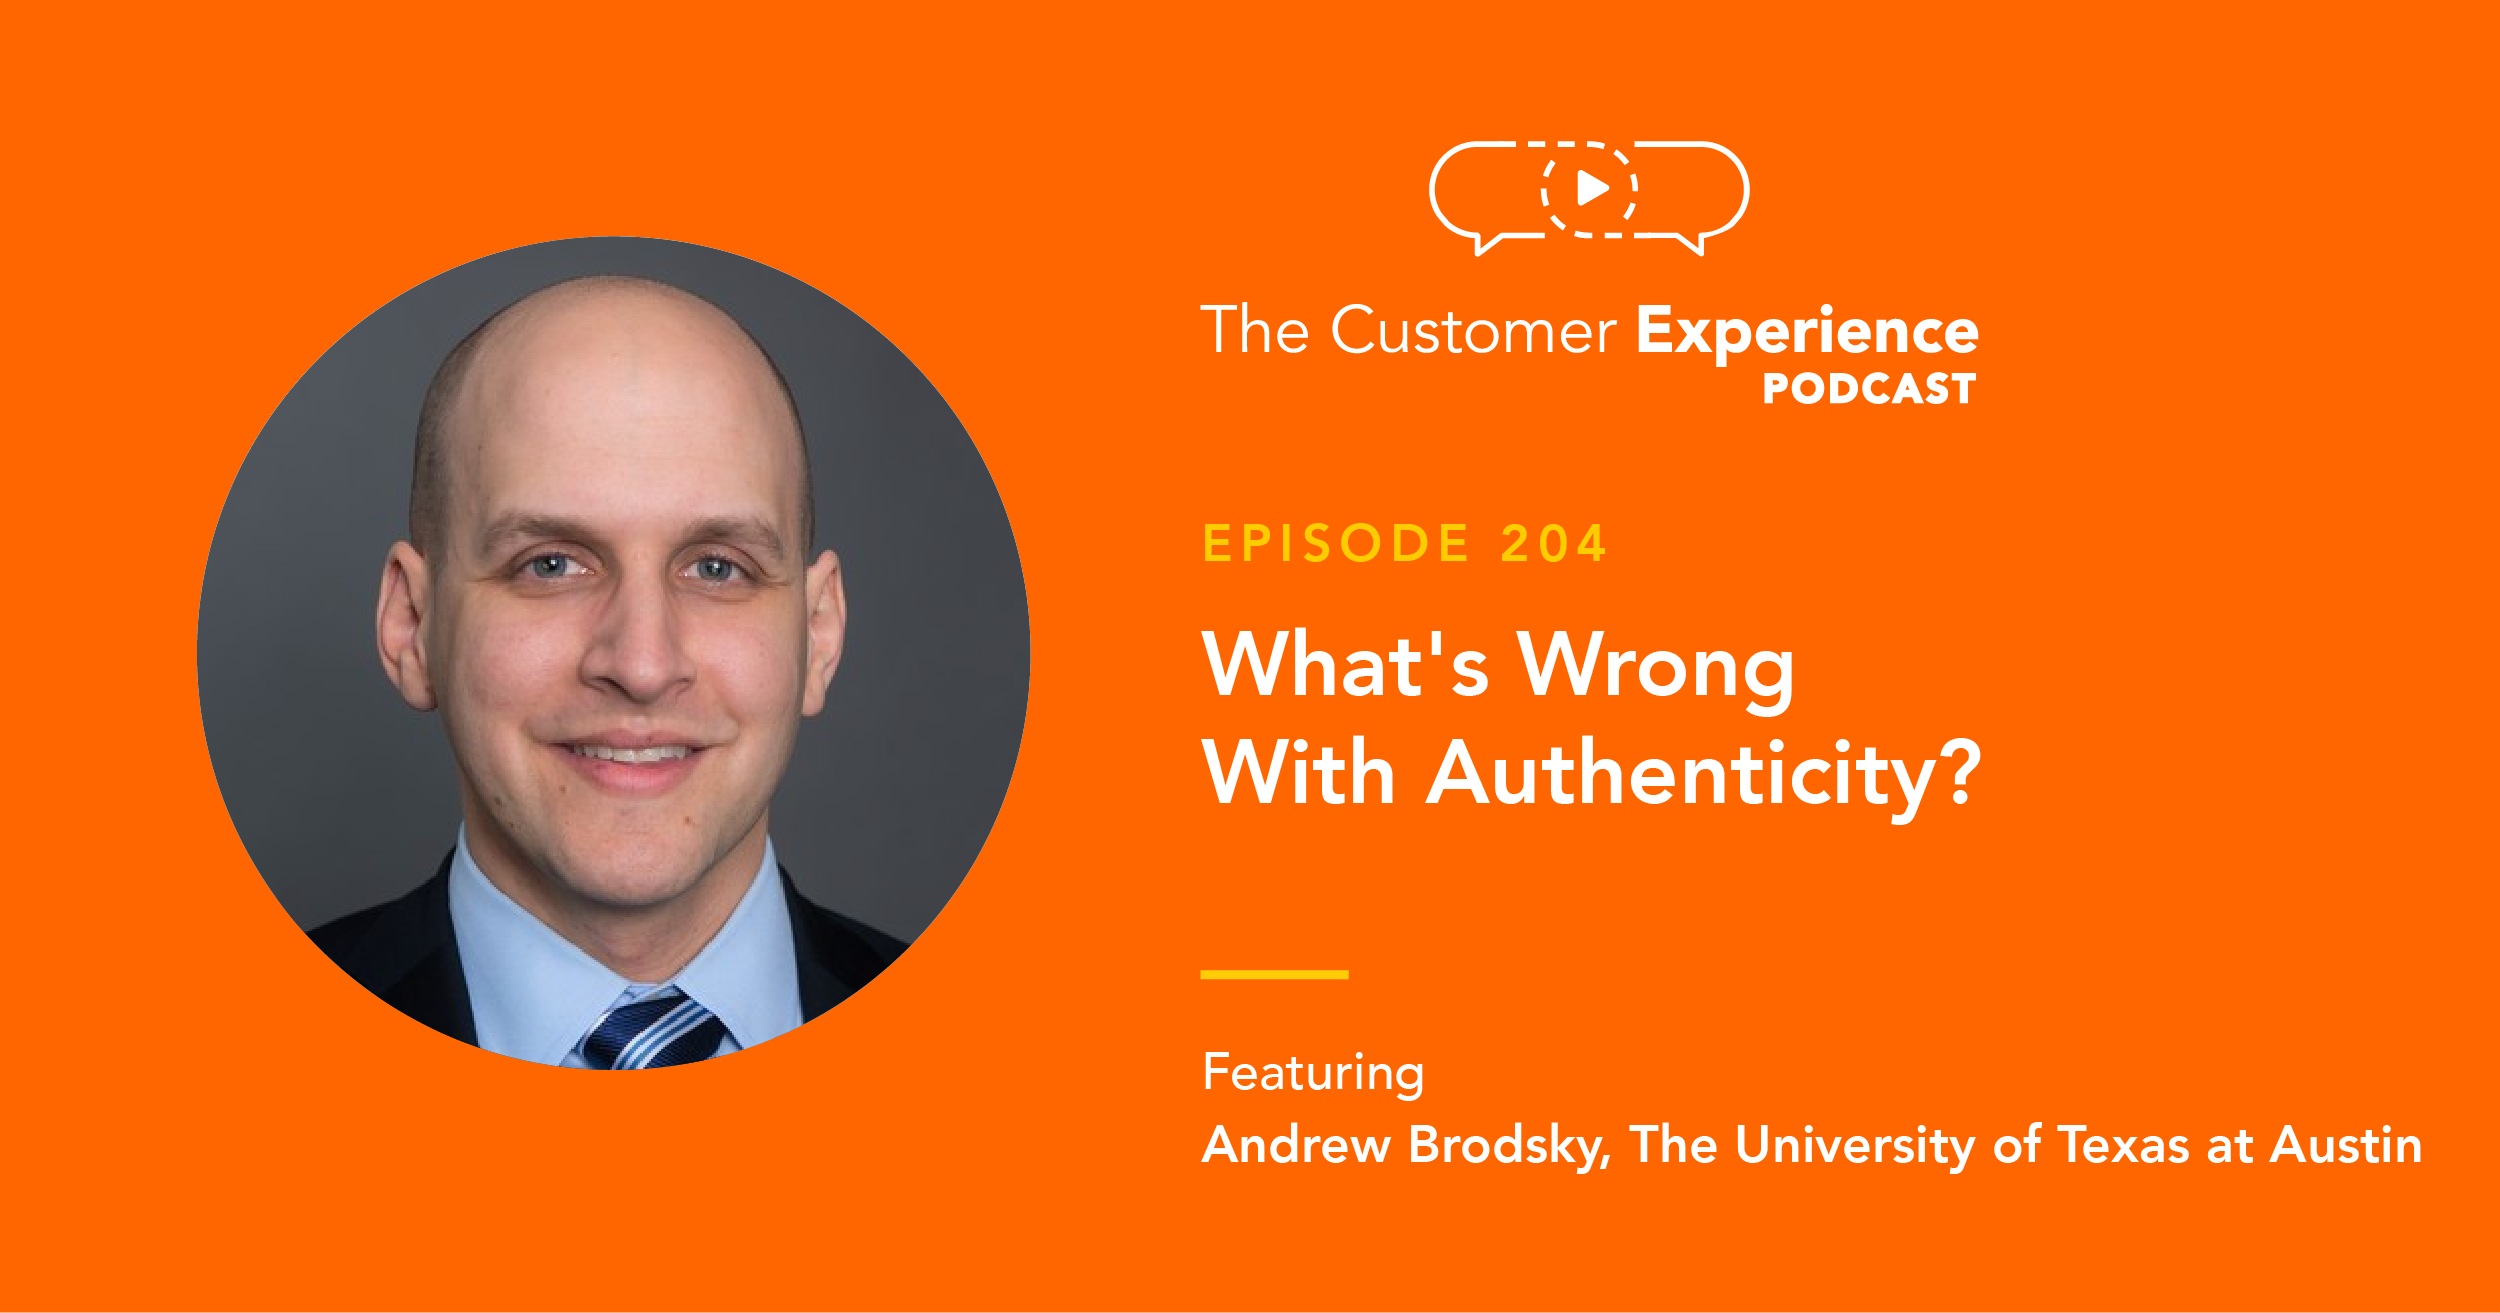 Andrew Brodsky, authentic, authenticity, The Customer Experience Podcast, McCombs, University of Texas, Texas at Austin, marketing, marketing professor, digital communication, workplace communication, email communication